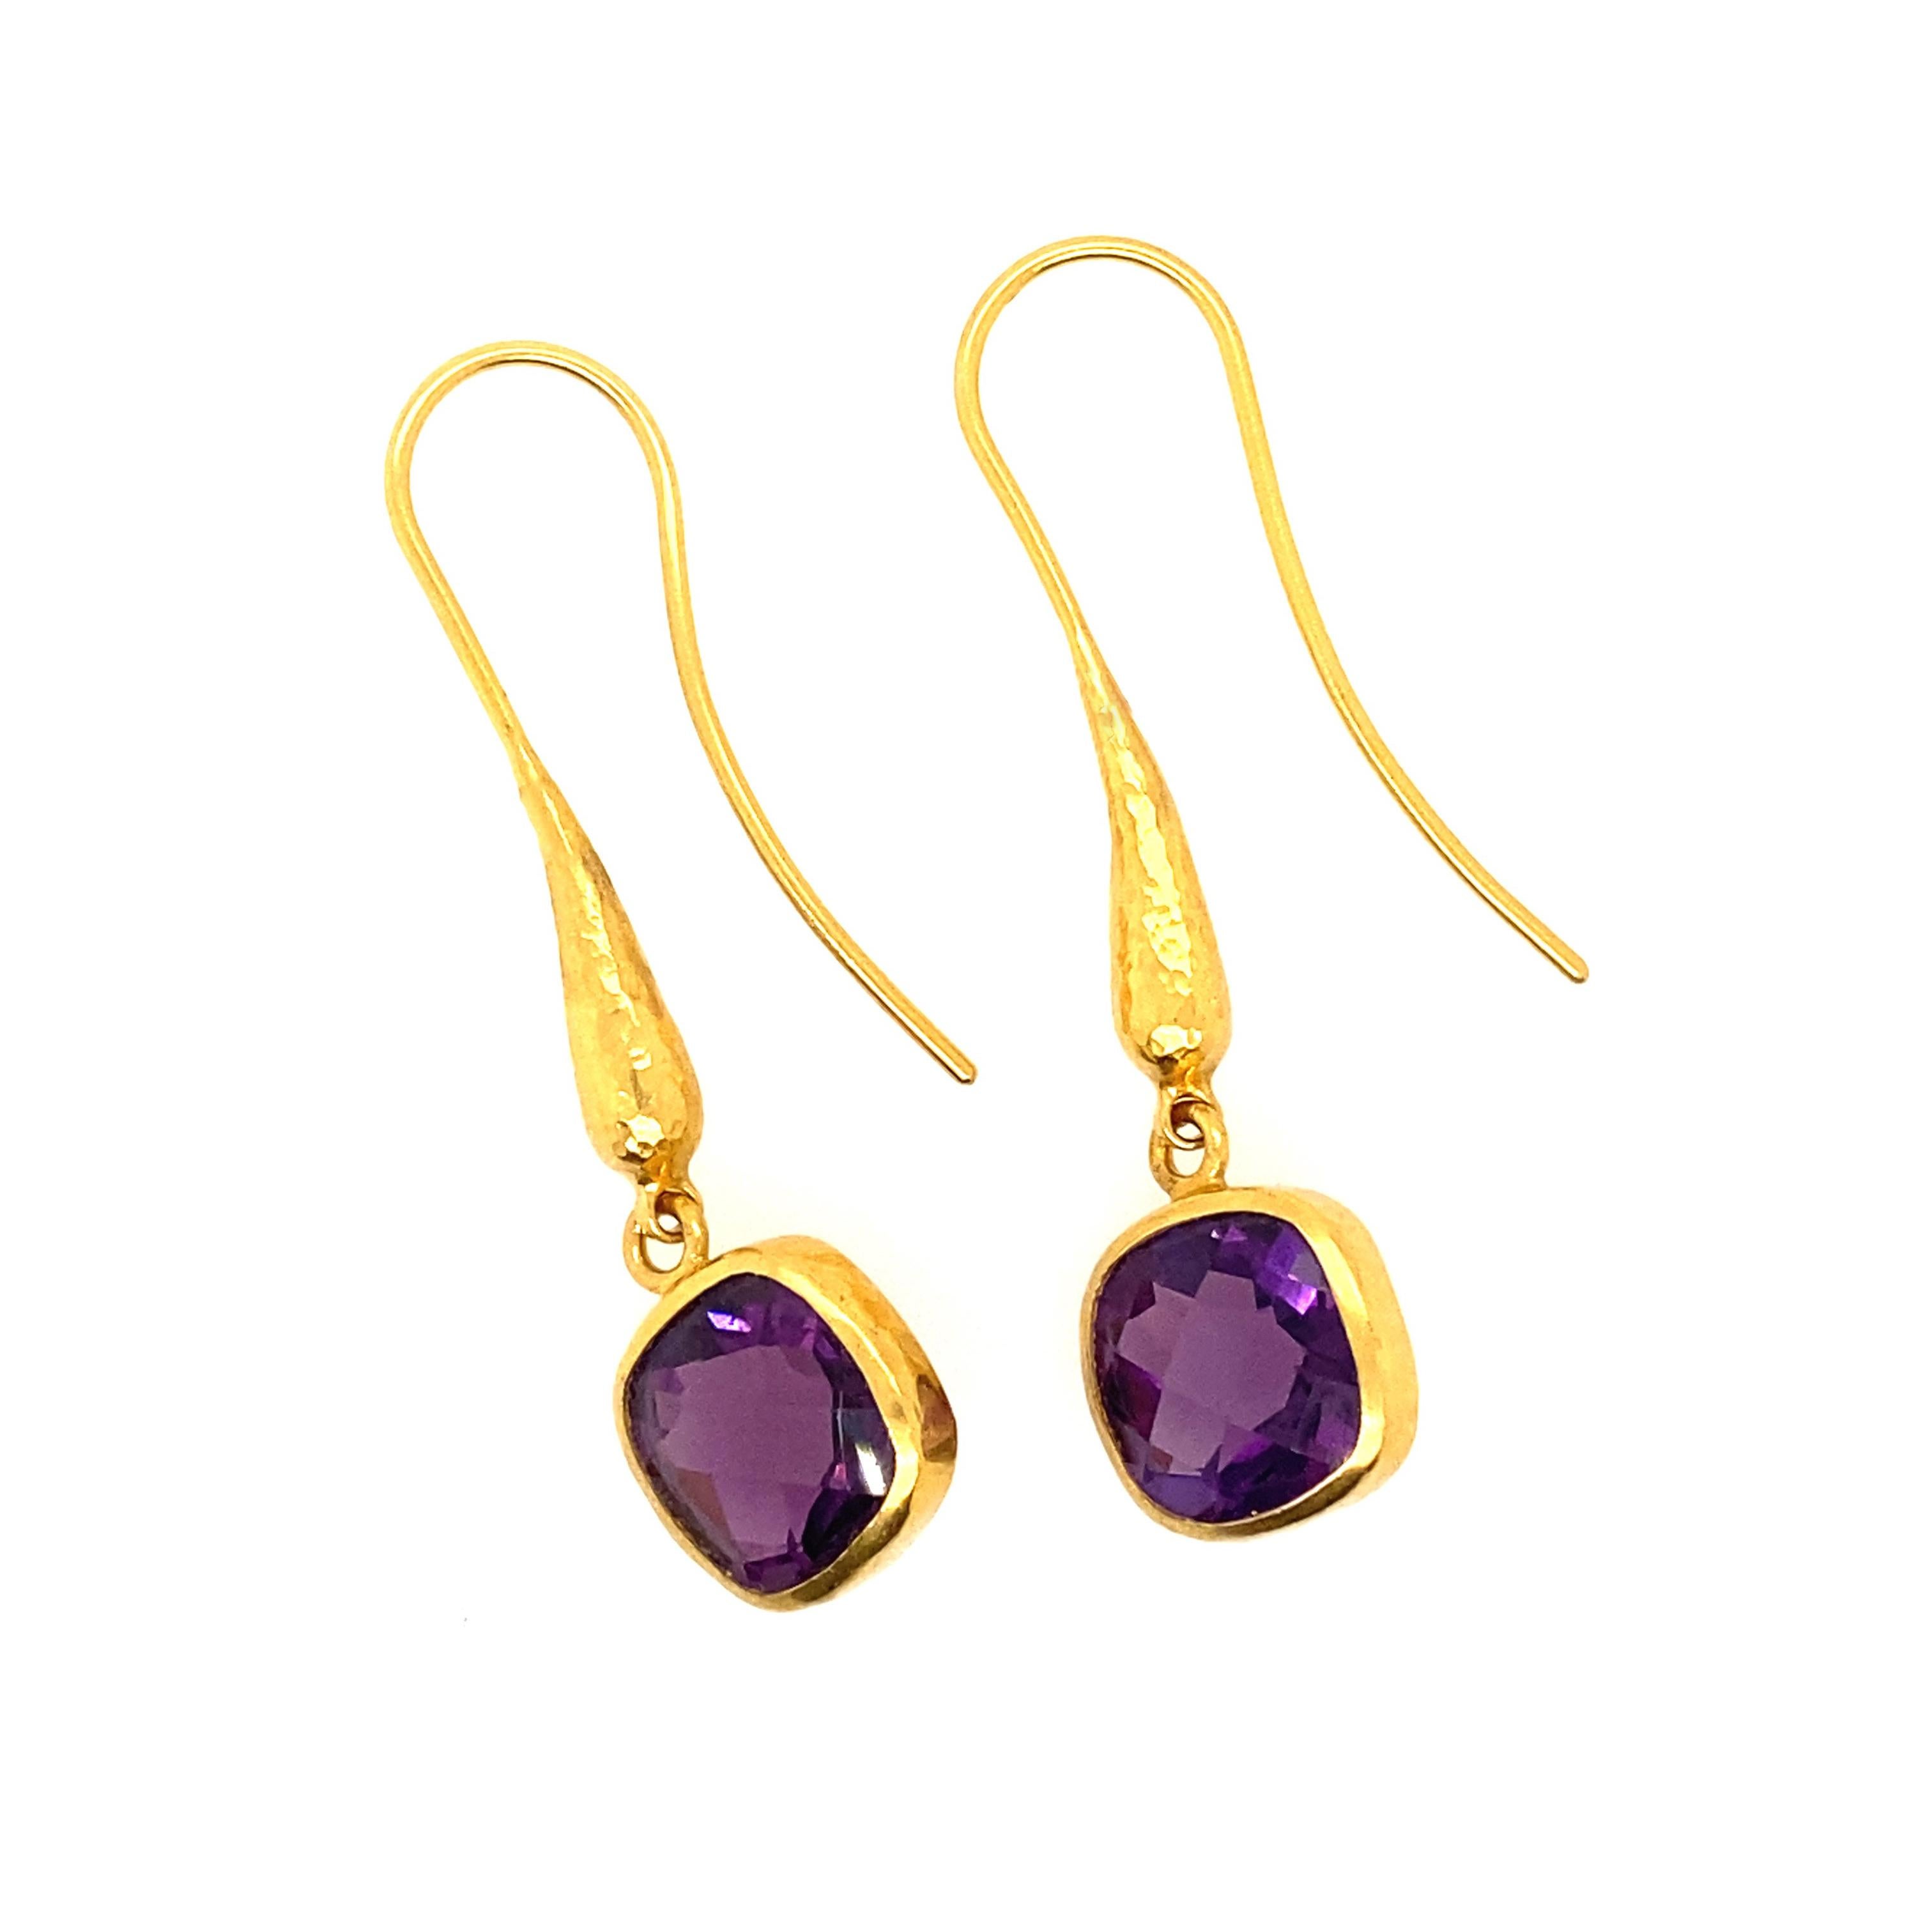 One-of-a-Kind 24 karat gold drop earrings, from the Prism Collection, featuring 10mm cushion faceted Amethysts. 7.88 carat total weight. 1.65 inches long.